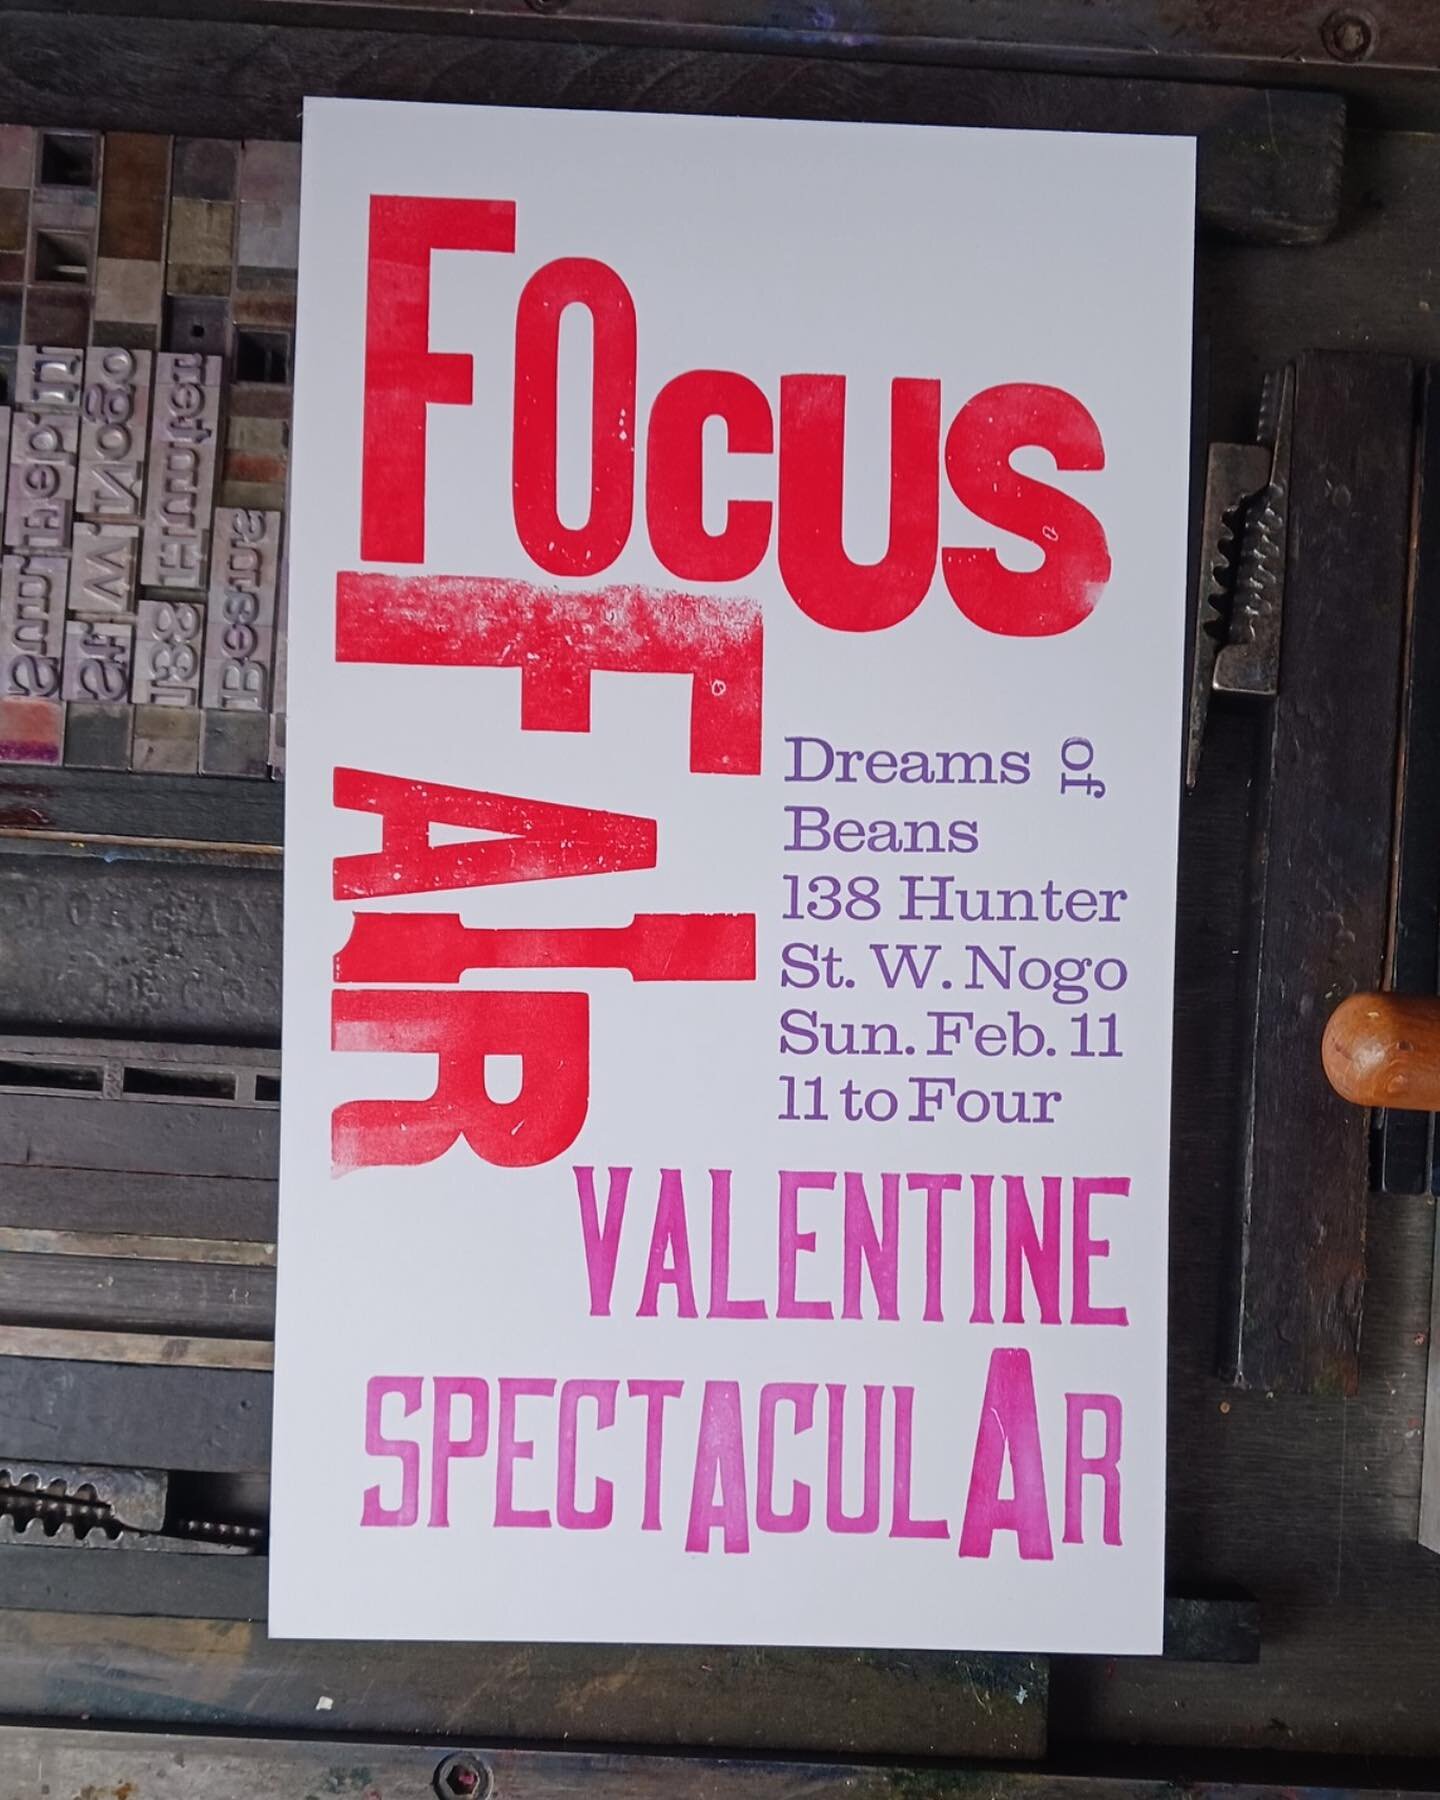 Looking for something special to gift your sweetie (or yourself)? I&rsquo;m not big into consumerist holidays, but I do love love, roses and gifting our people (and ourselves) beautiful things! 

Come down to a special Valentines edition of the Focus